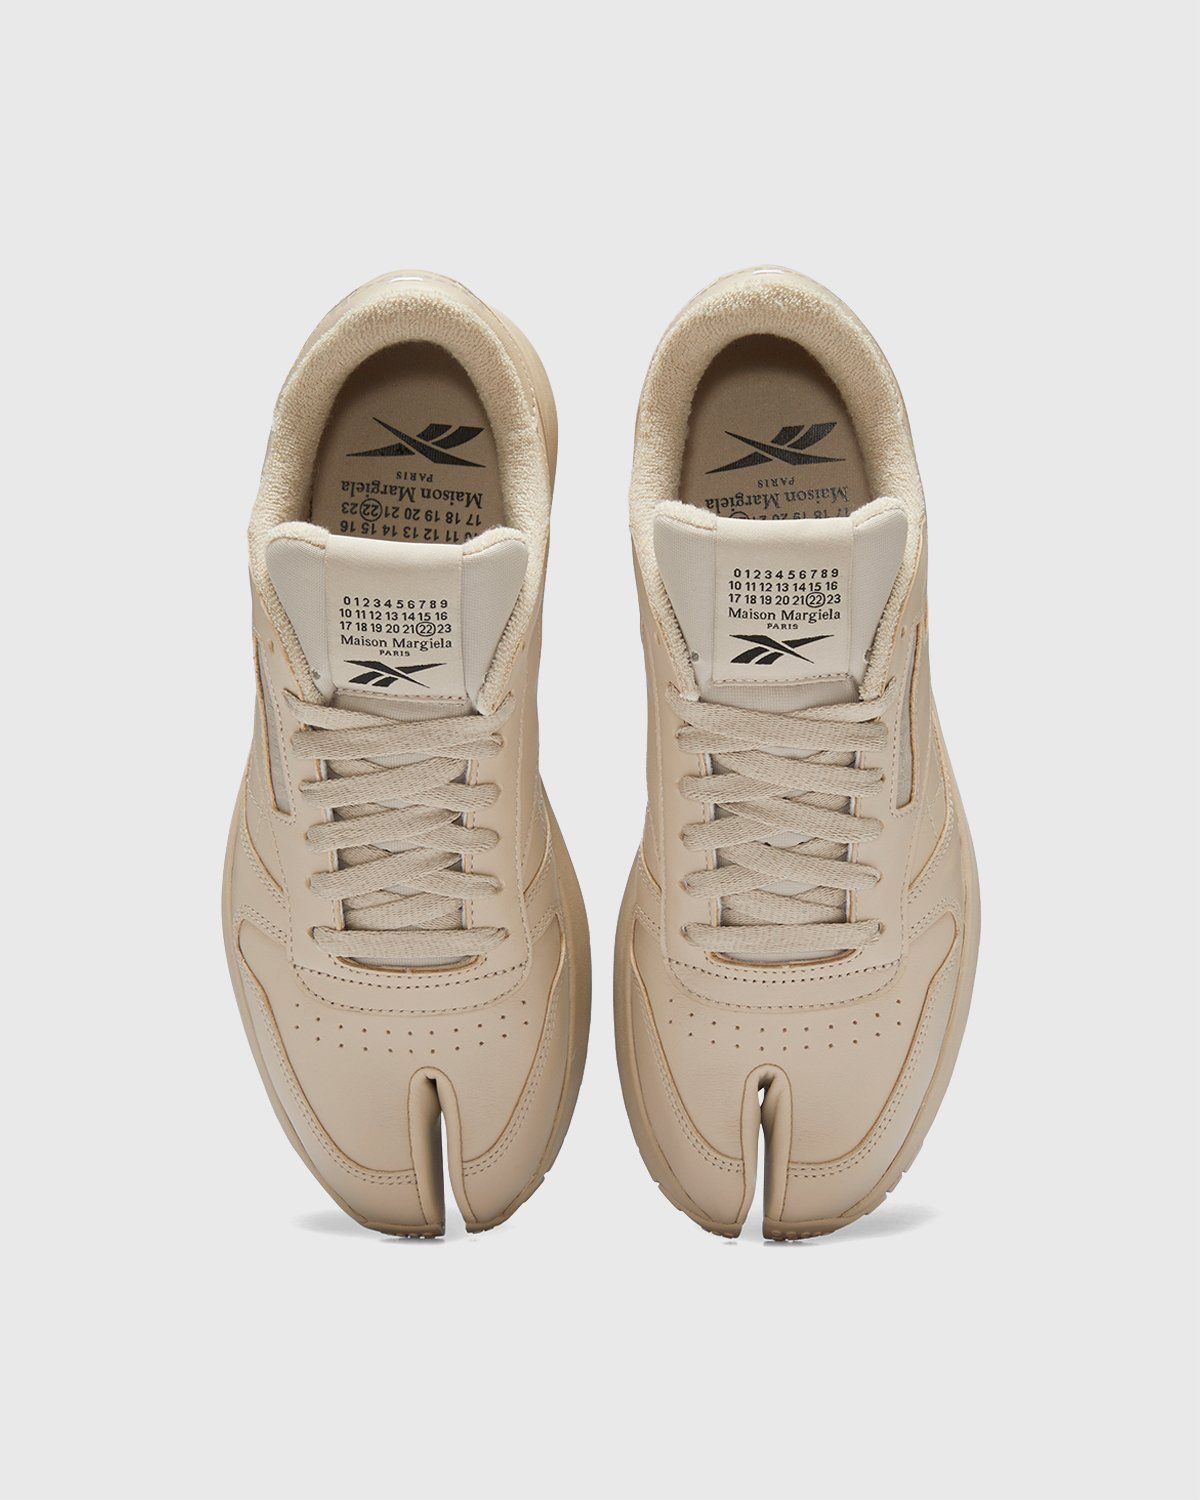 Maison Margiela x Reebok – Classic Leather Tabi Natural - Low Top Sneakers - Beige - Image 4